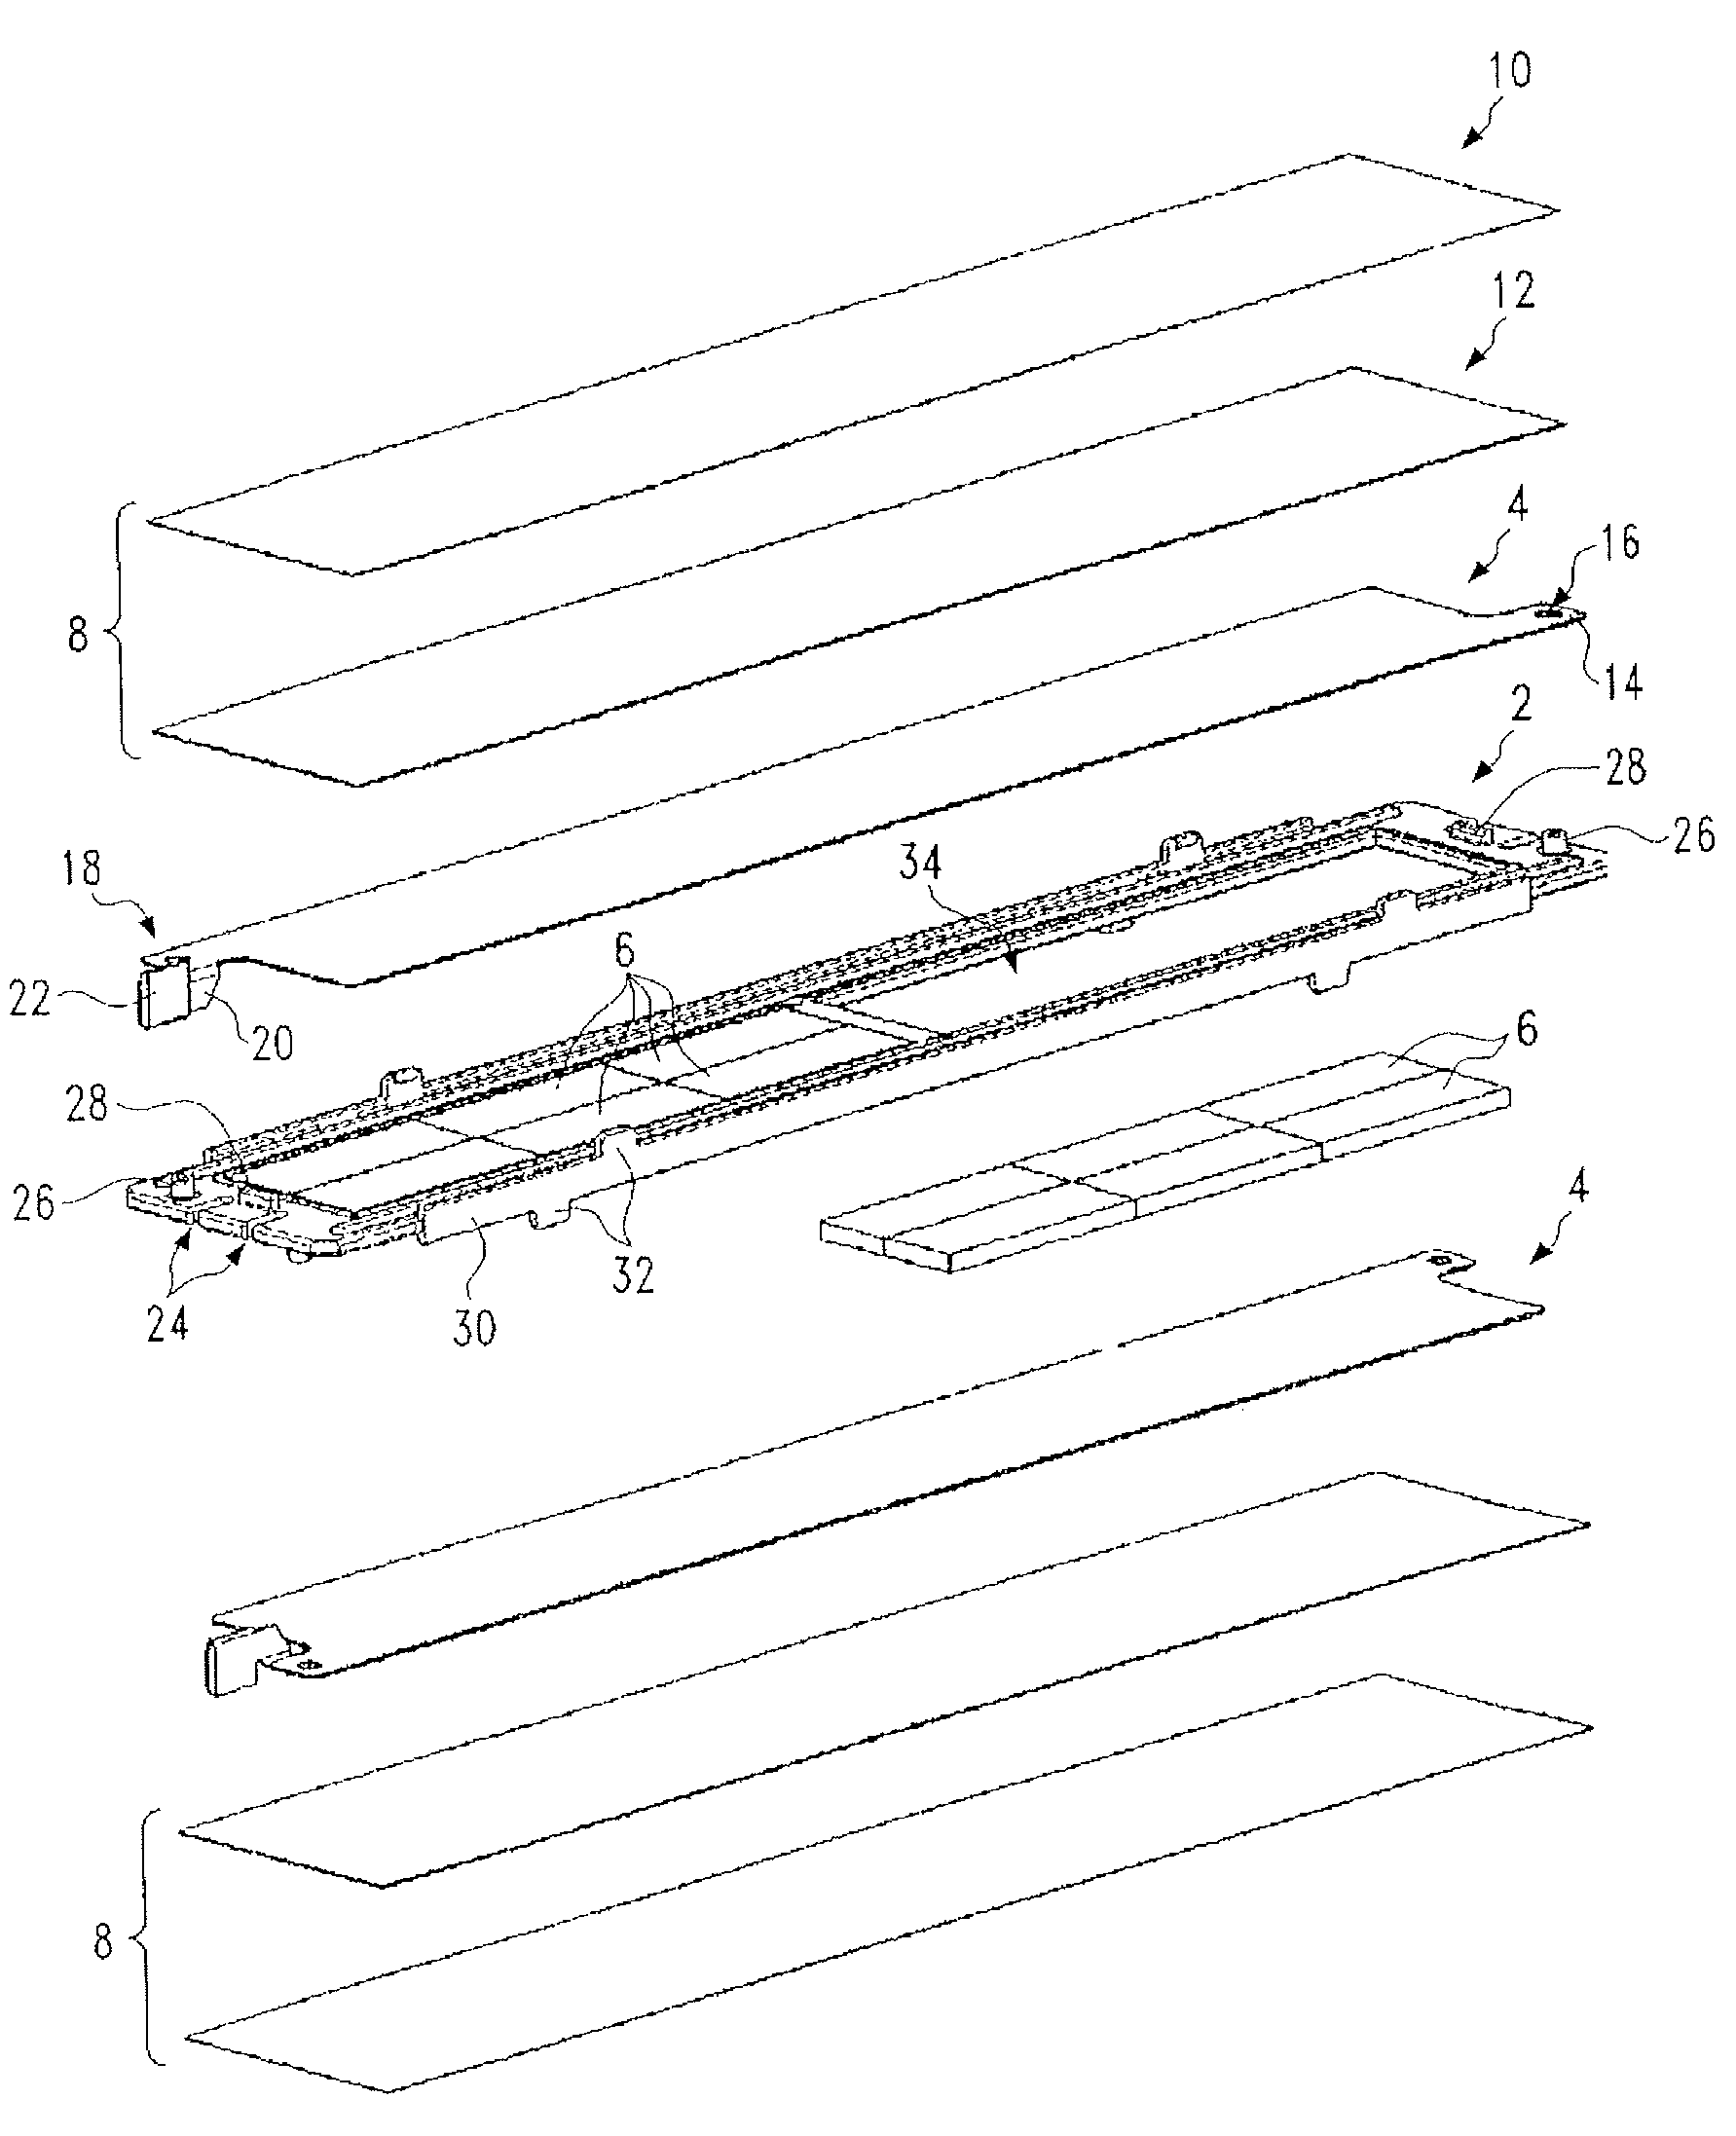 Heat-generating element of a heating device